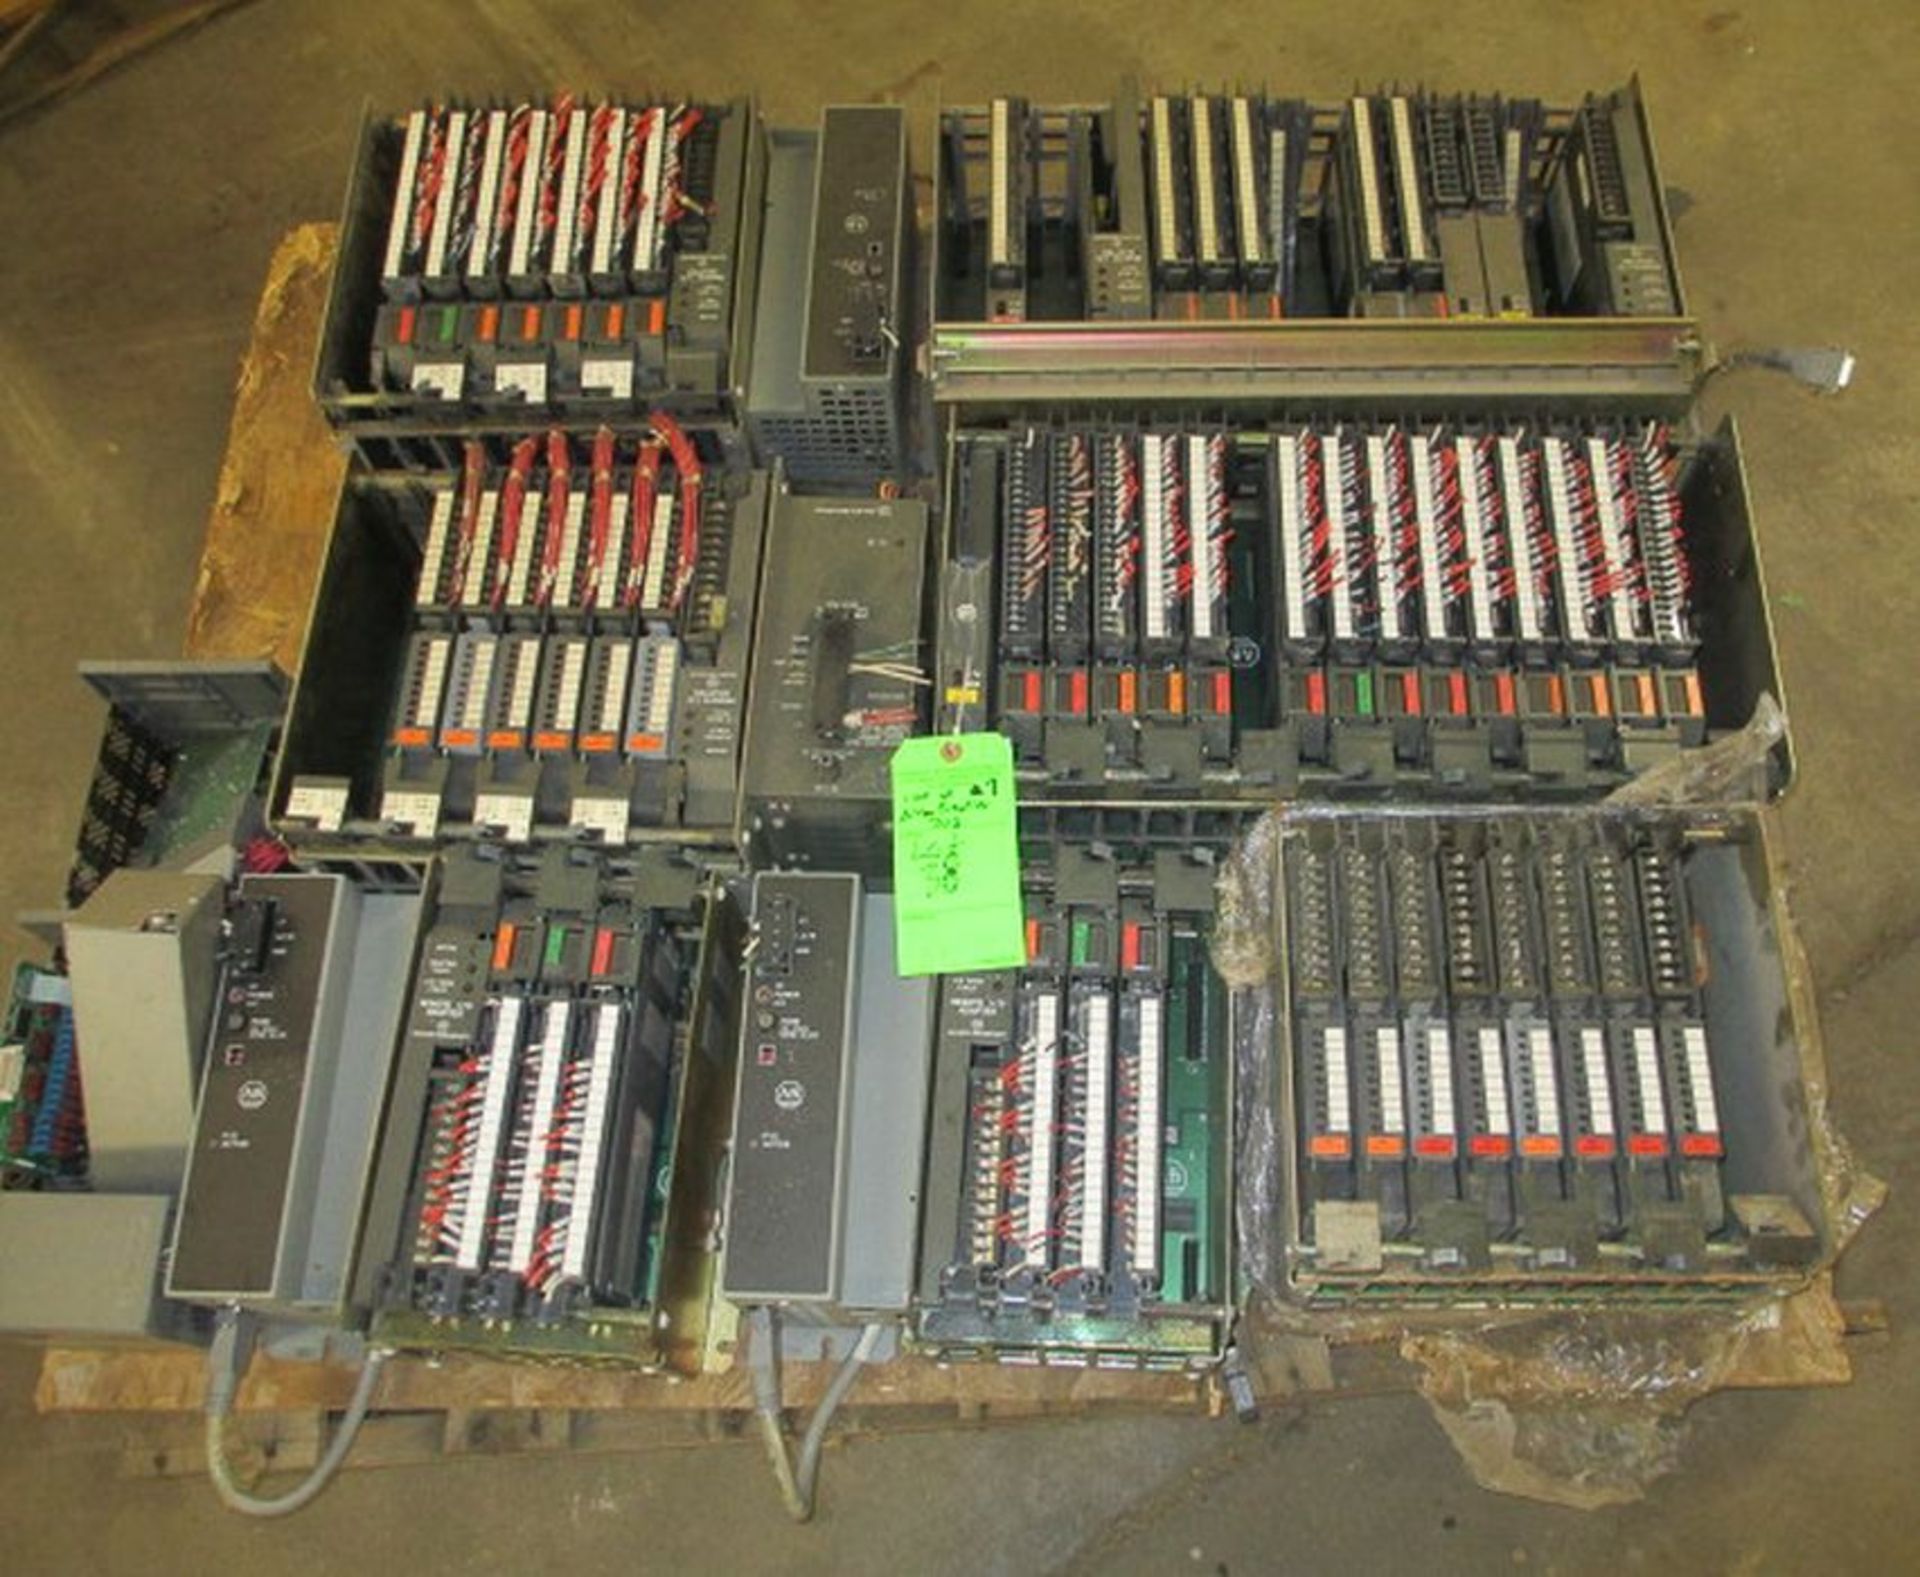 Allen Bradley PLC Racks, Total of (7) Chassis, Includes Cat # 1771-A4B Chassis with Modules ;